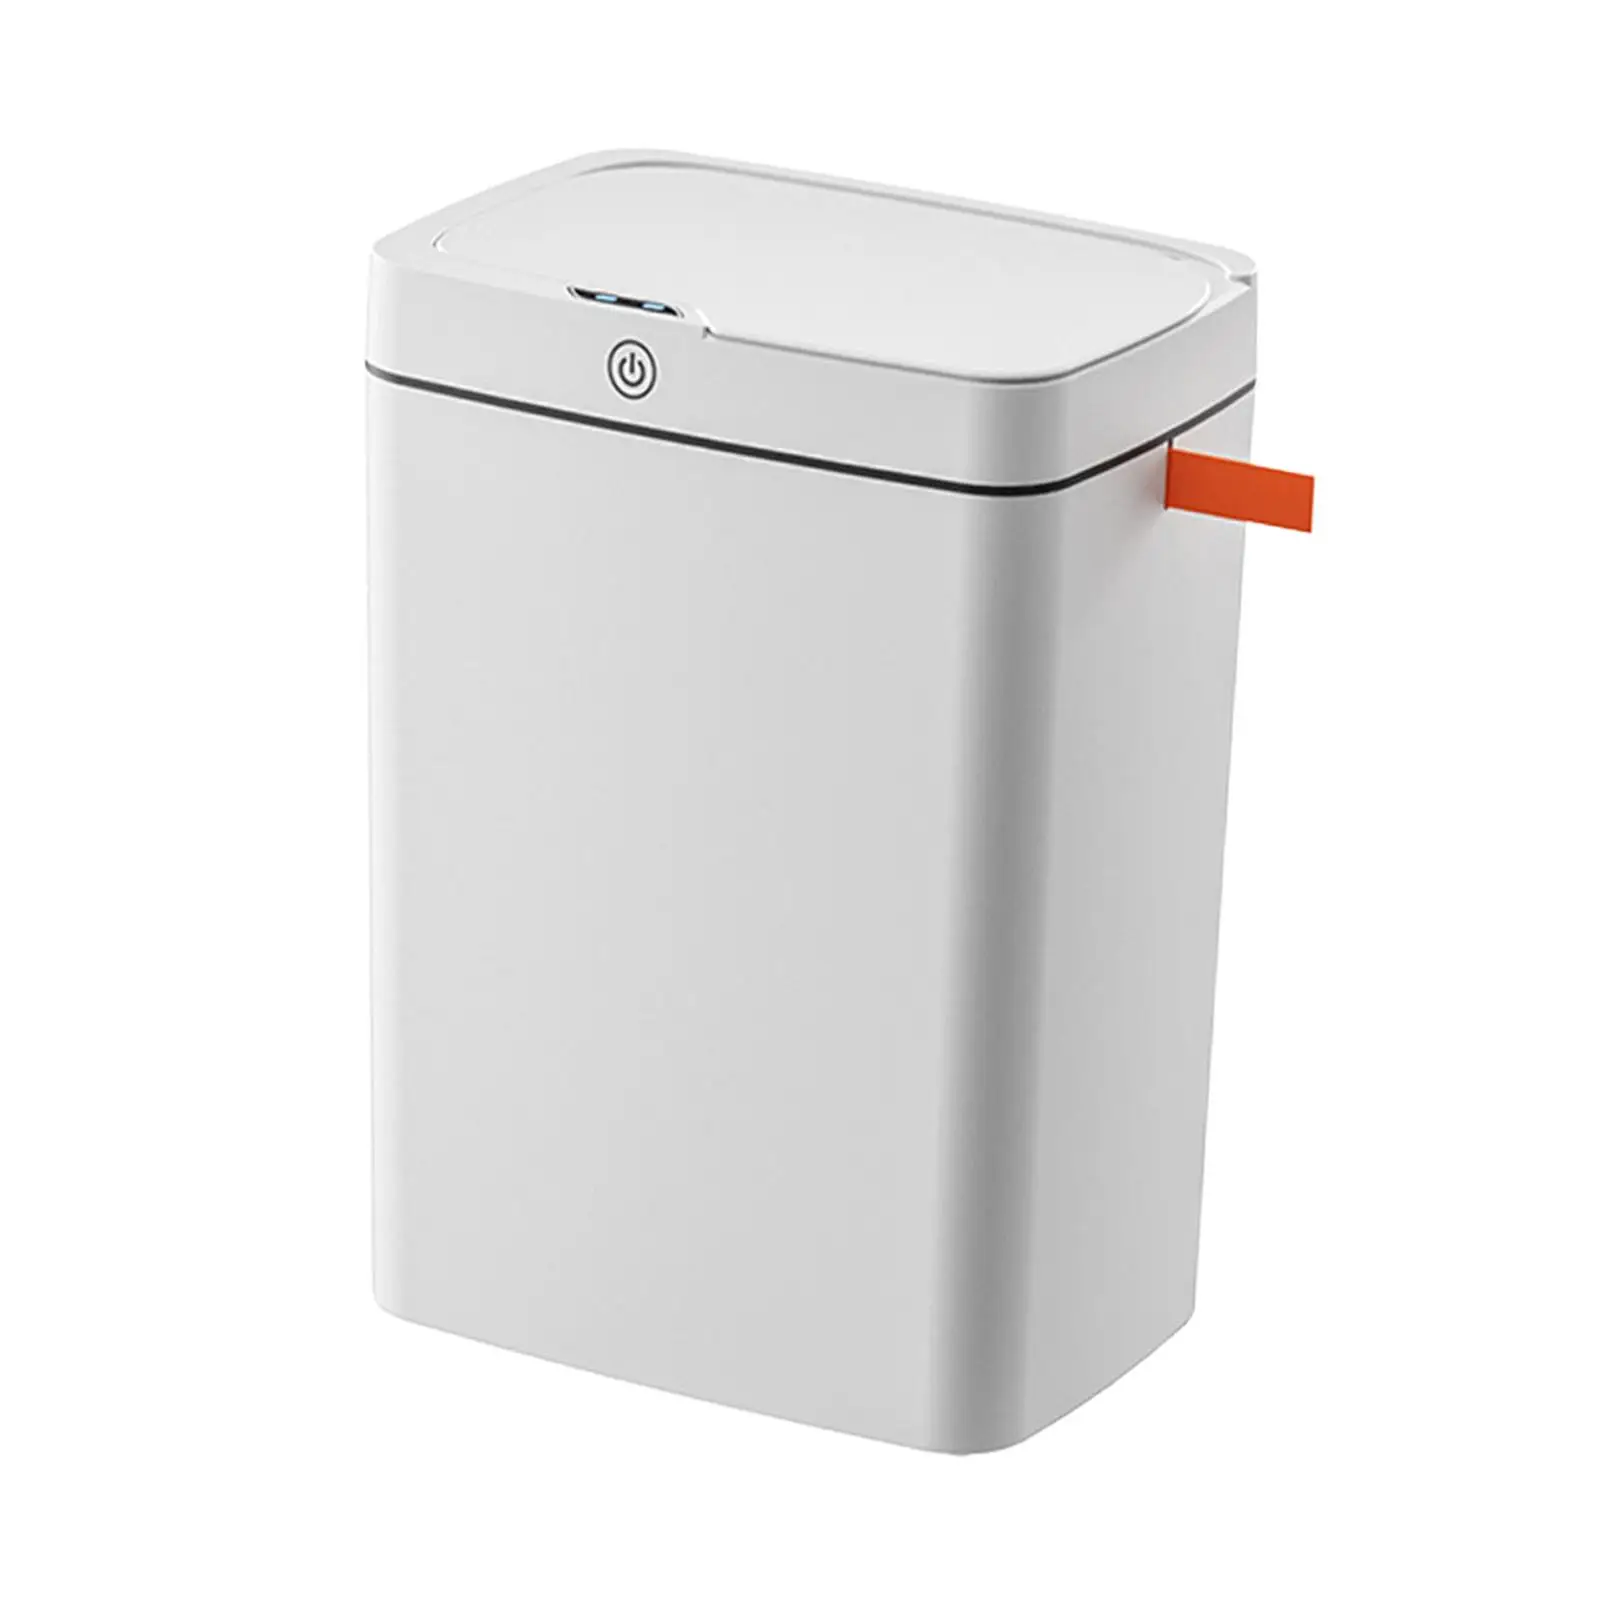 Intelligent Sensor Touchless Narrow Trash Can 18L Durable Waterproof 18.5cm Width Waste Bin USB Charge for Sitting Room, Bedroom